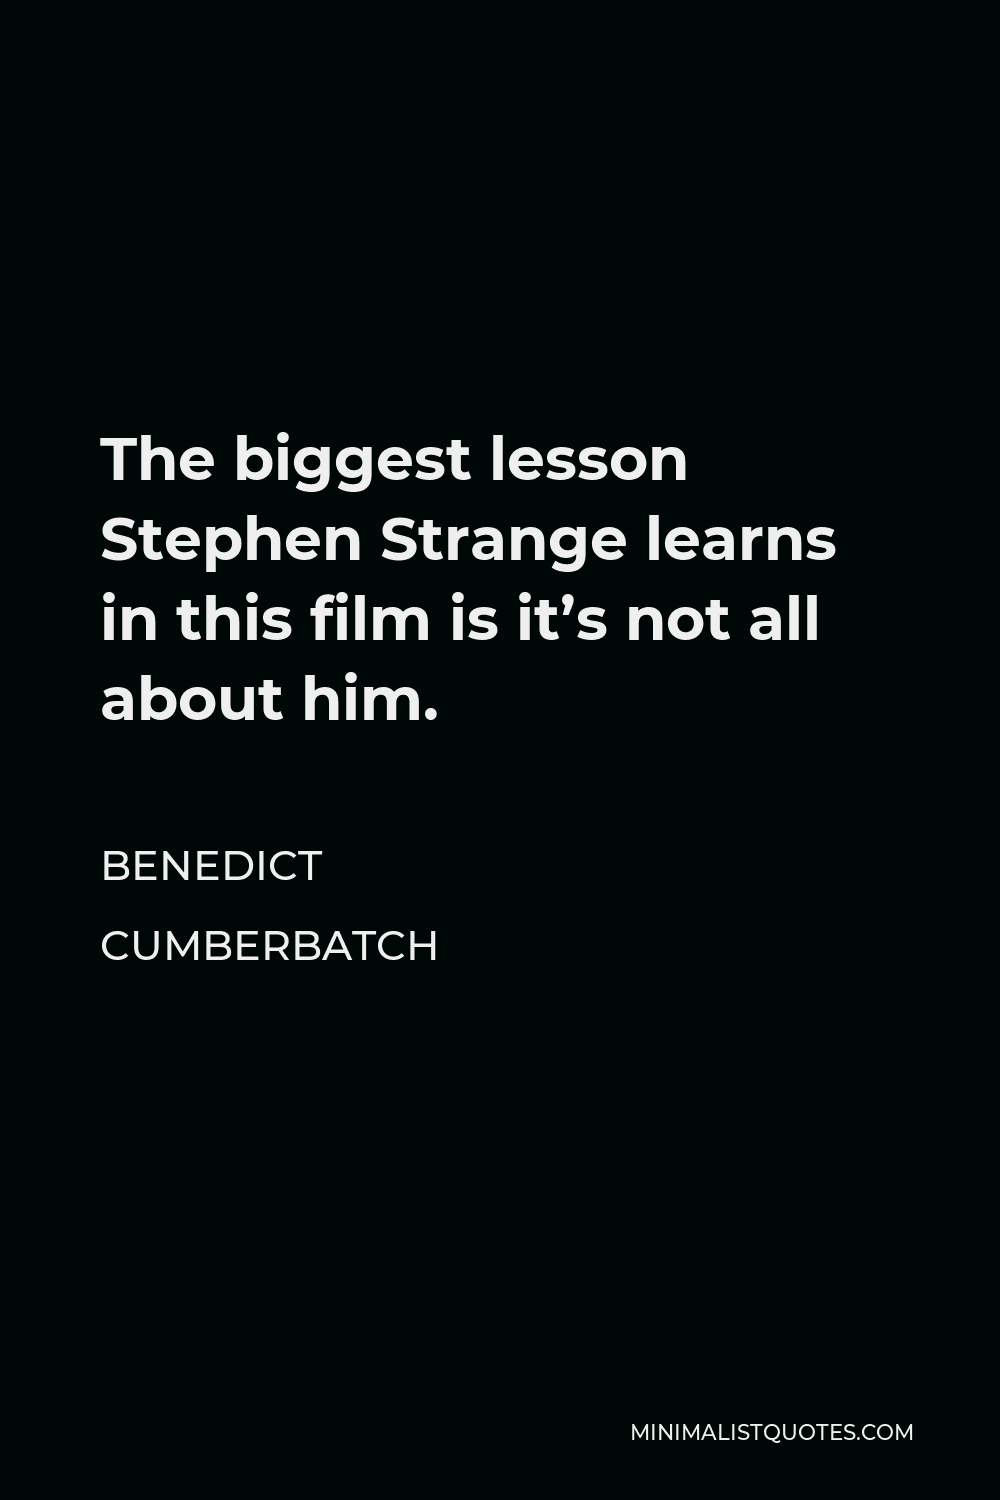 Benedict Cumberbatch Quote - The biggest lesson Stephen Strange learns in this film is it’s not all about him.